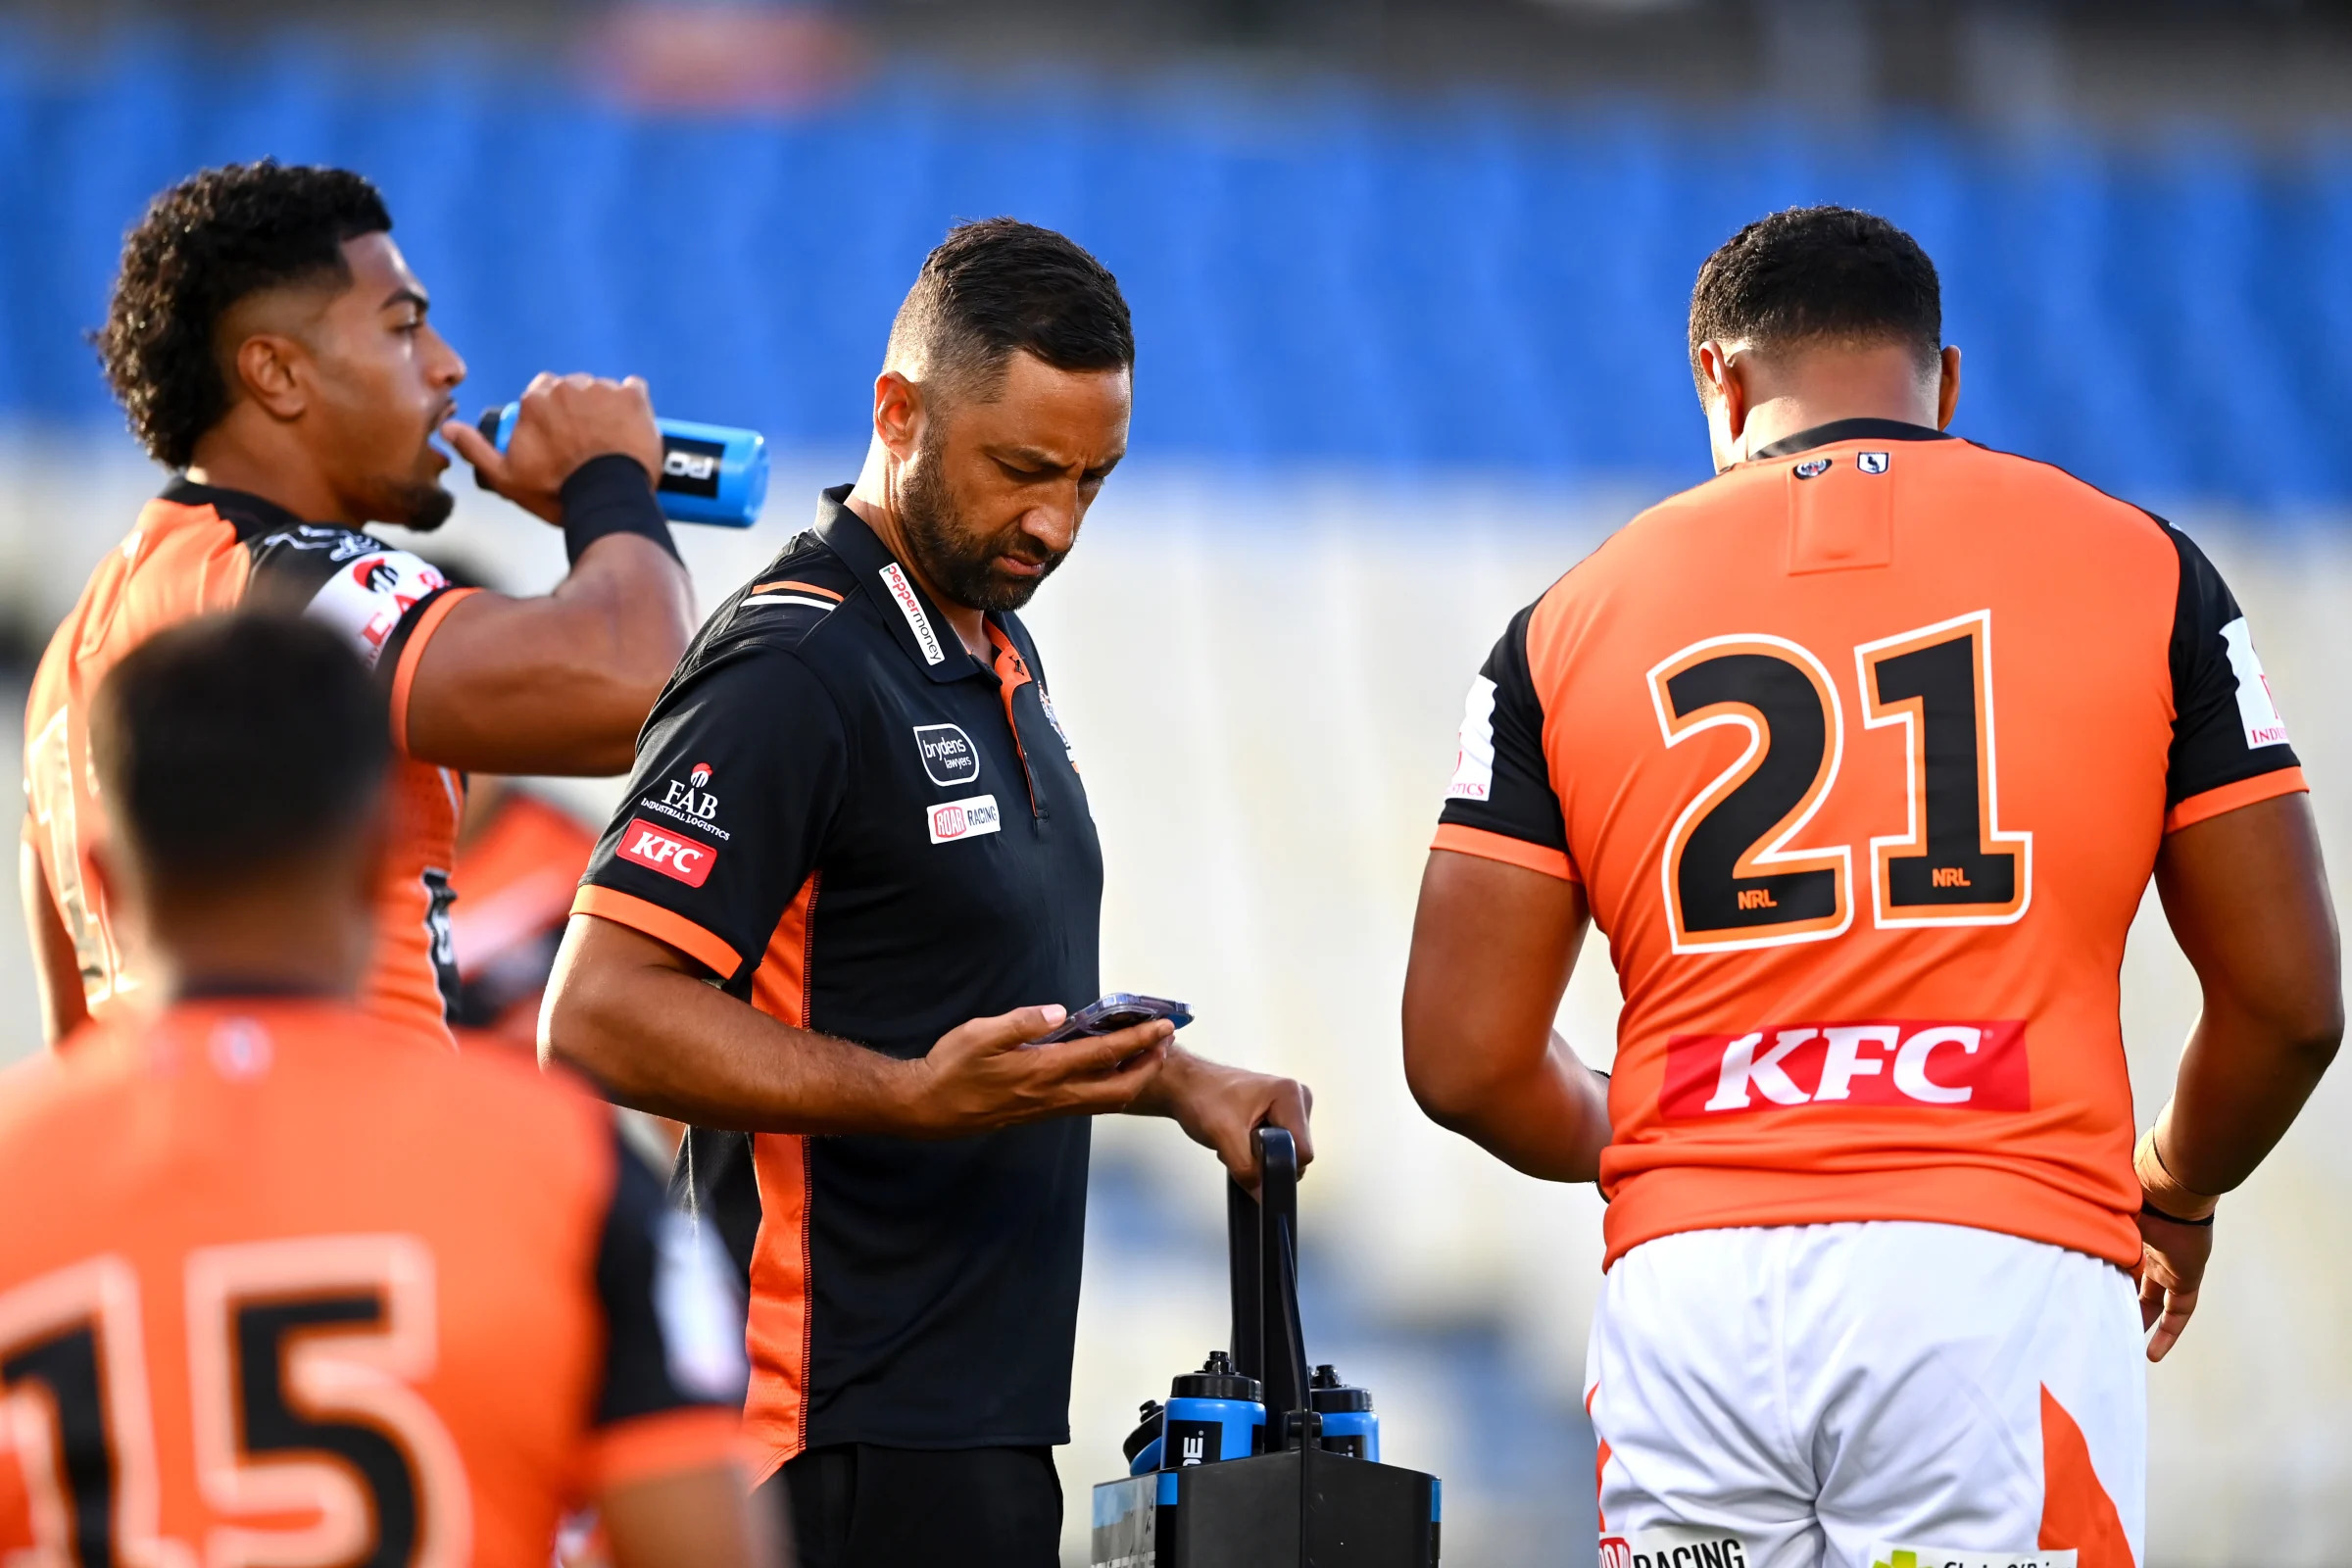 AUCKLAND, NEW ZEALAND - FEBRUARY 09: West Tigers assistant coach Benji Marshall looks on ahead of the NRL trial match between New Zealand Warriors and Wests Tigers at Mt Smart Stadium on February 09, 2023 in Auckland, New Zealand. (Photo by Hannah Peters/Getty Images)